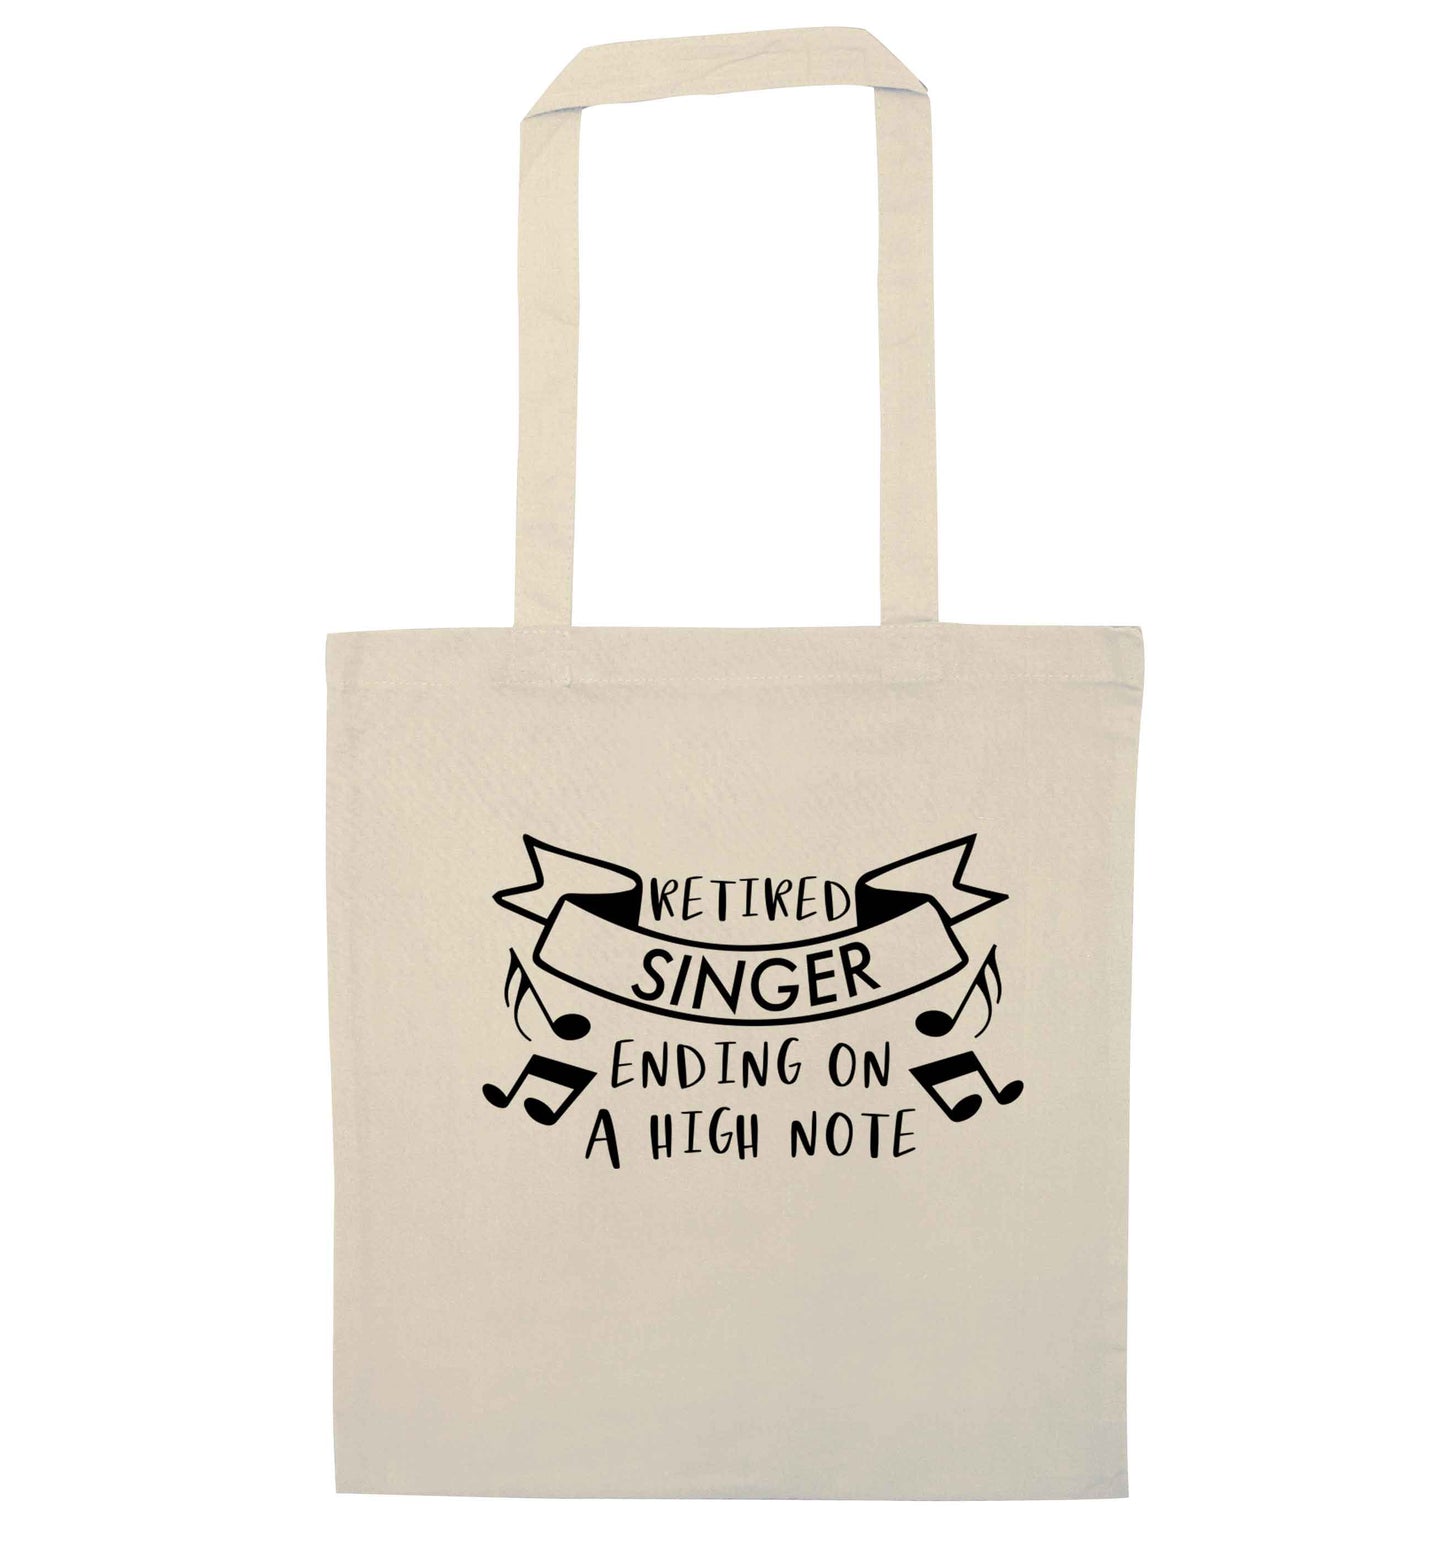 Retired singer ending on a high note natural tote bag